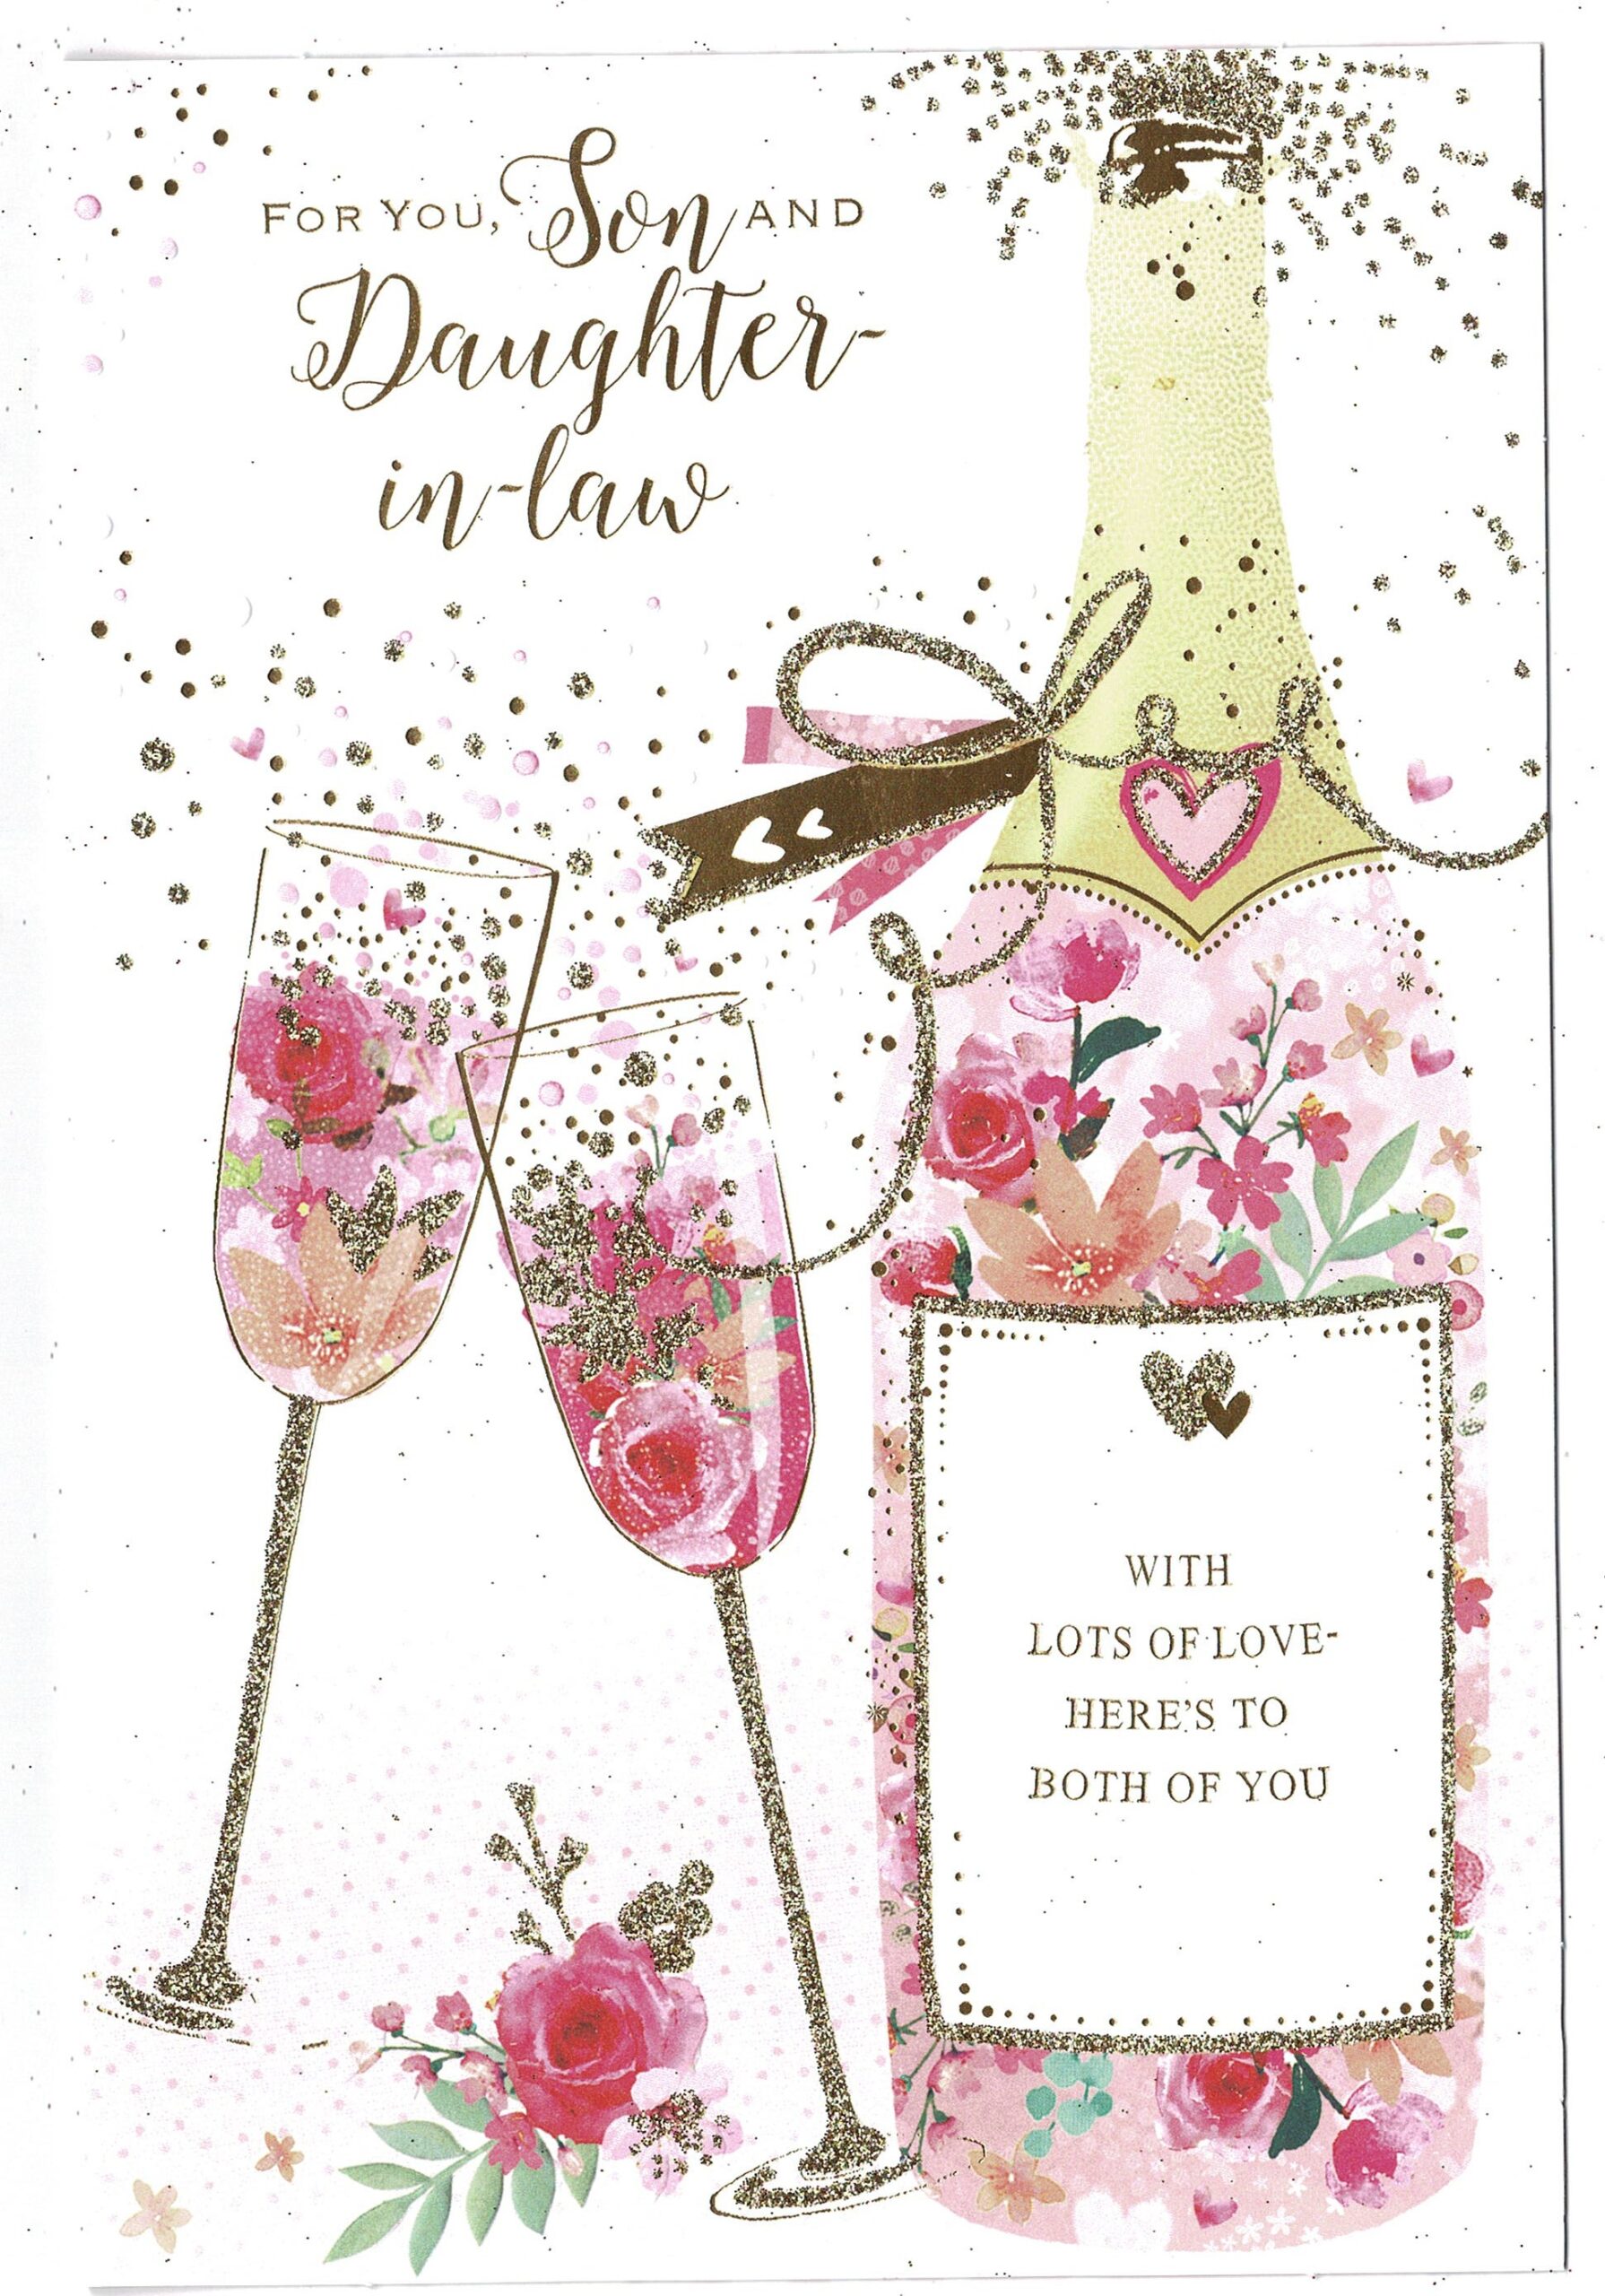 Daughter And Son In Law Anniversary Card 'For You Daughter And Son In ...